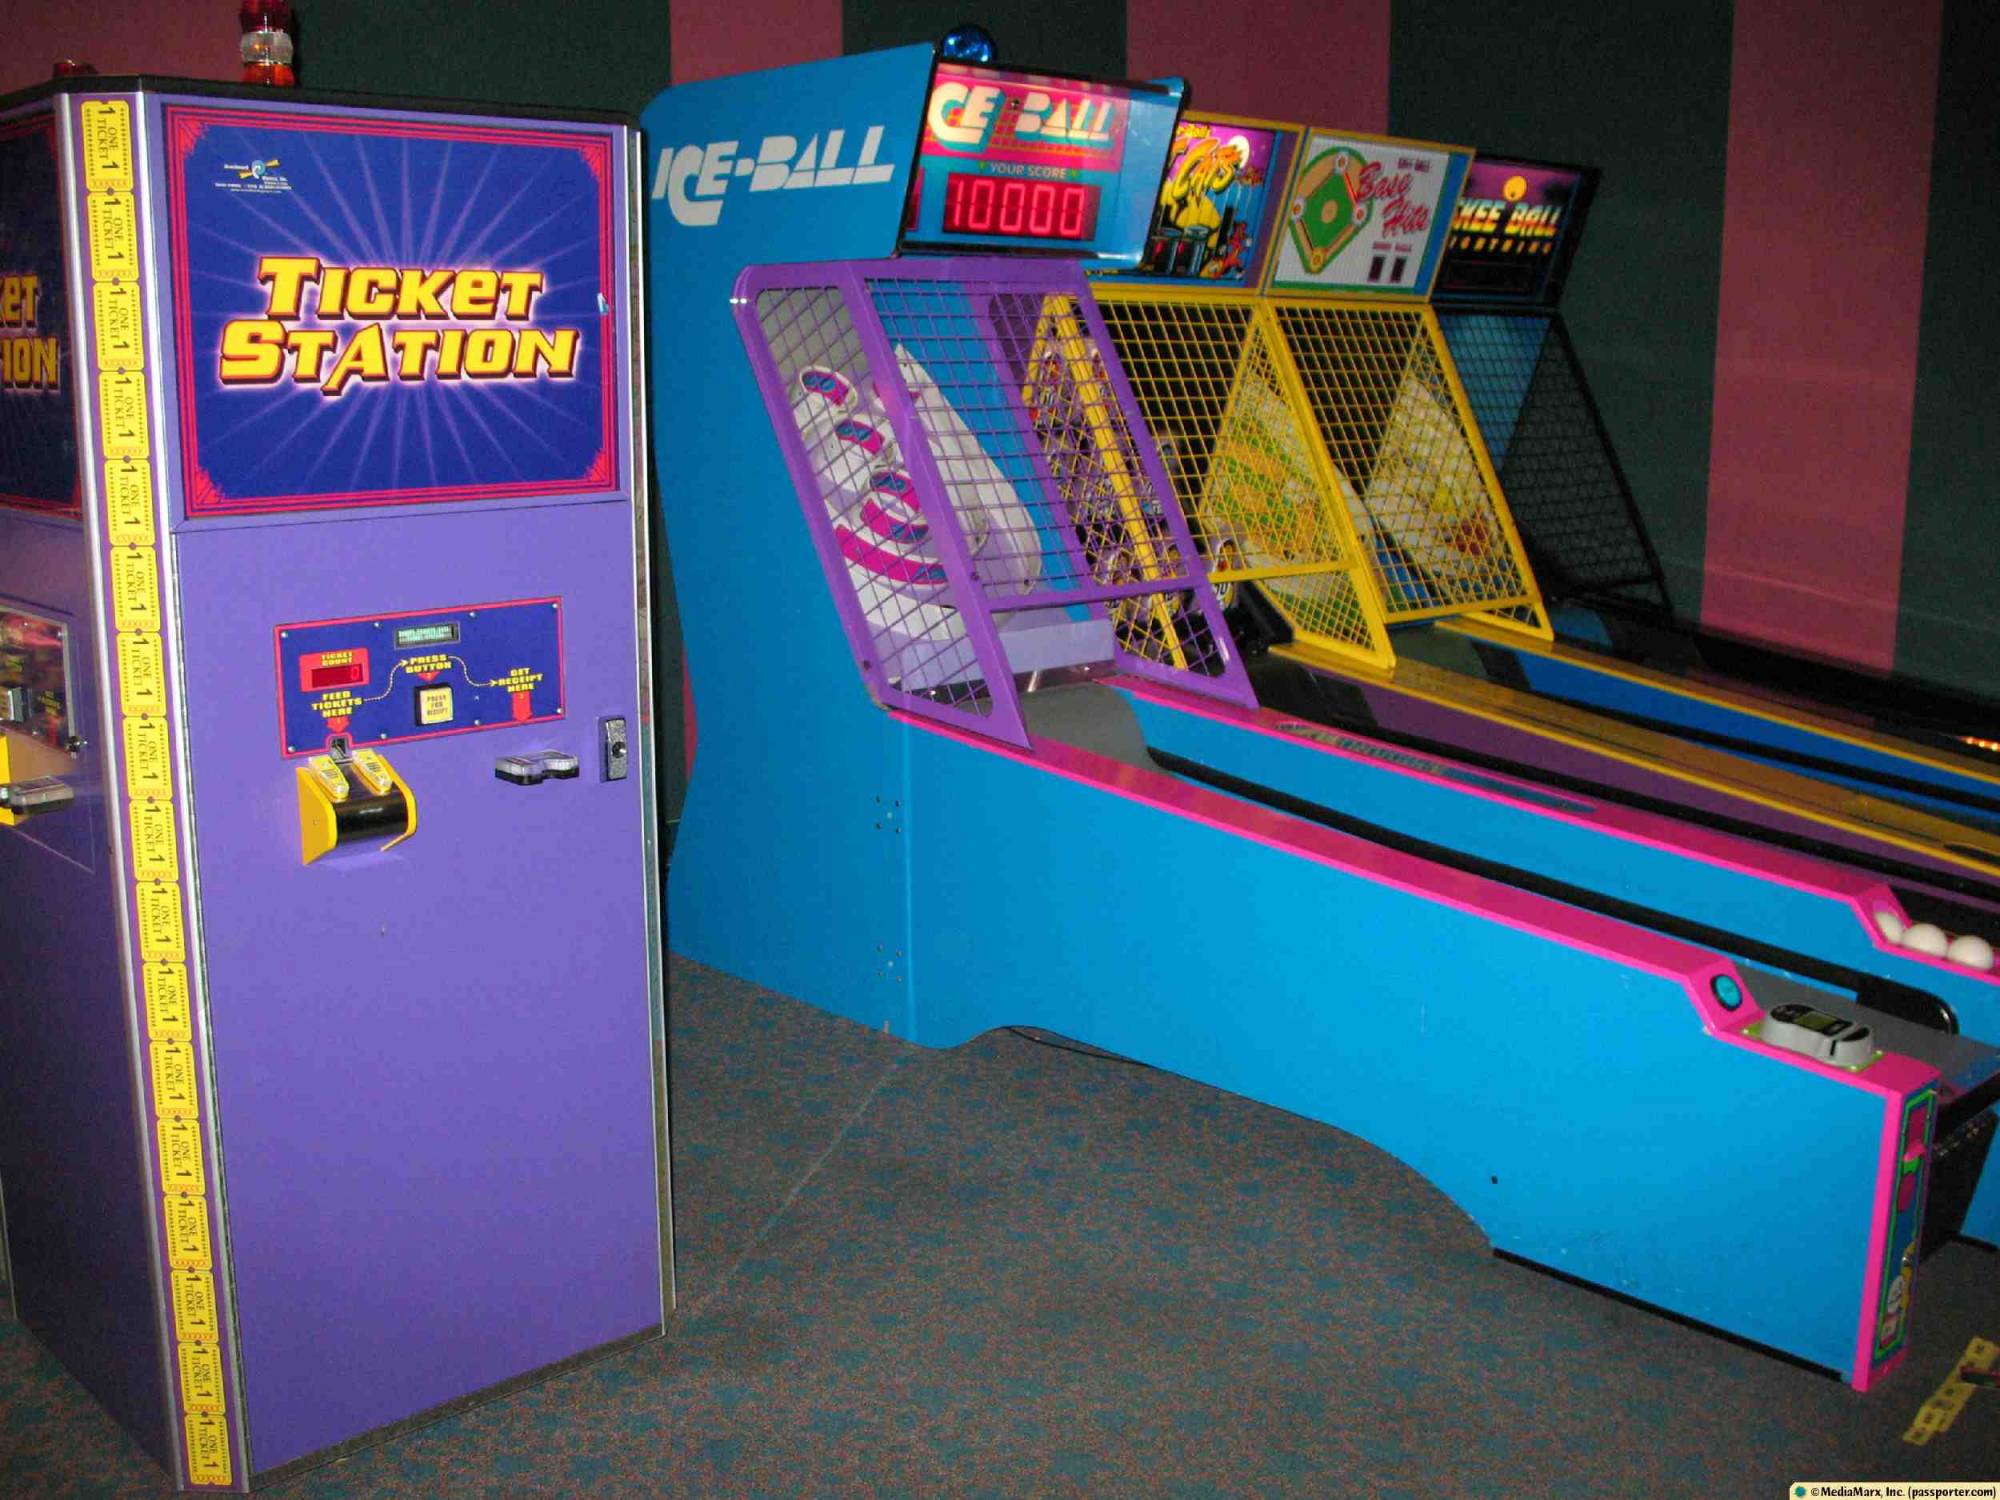 All-Star Music - Note'able Games Arcade